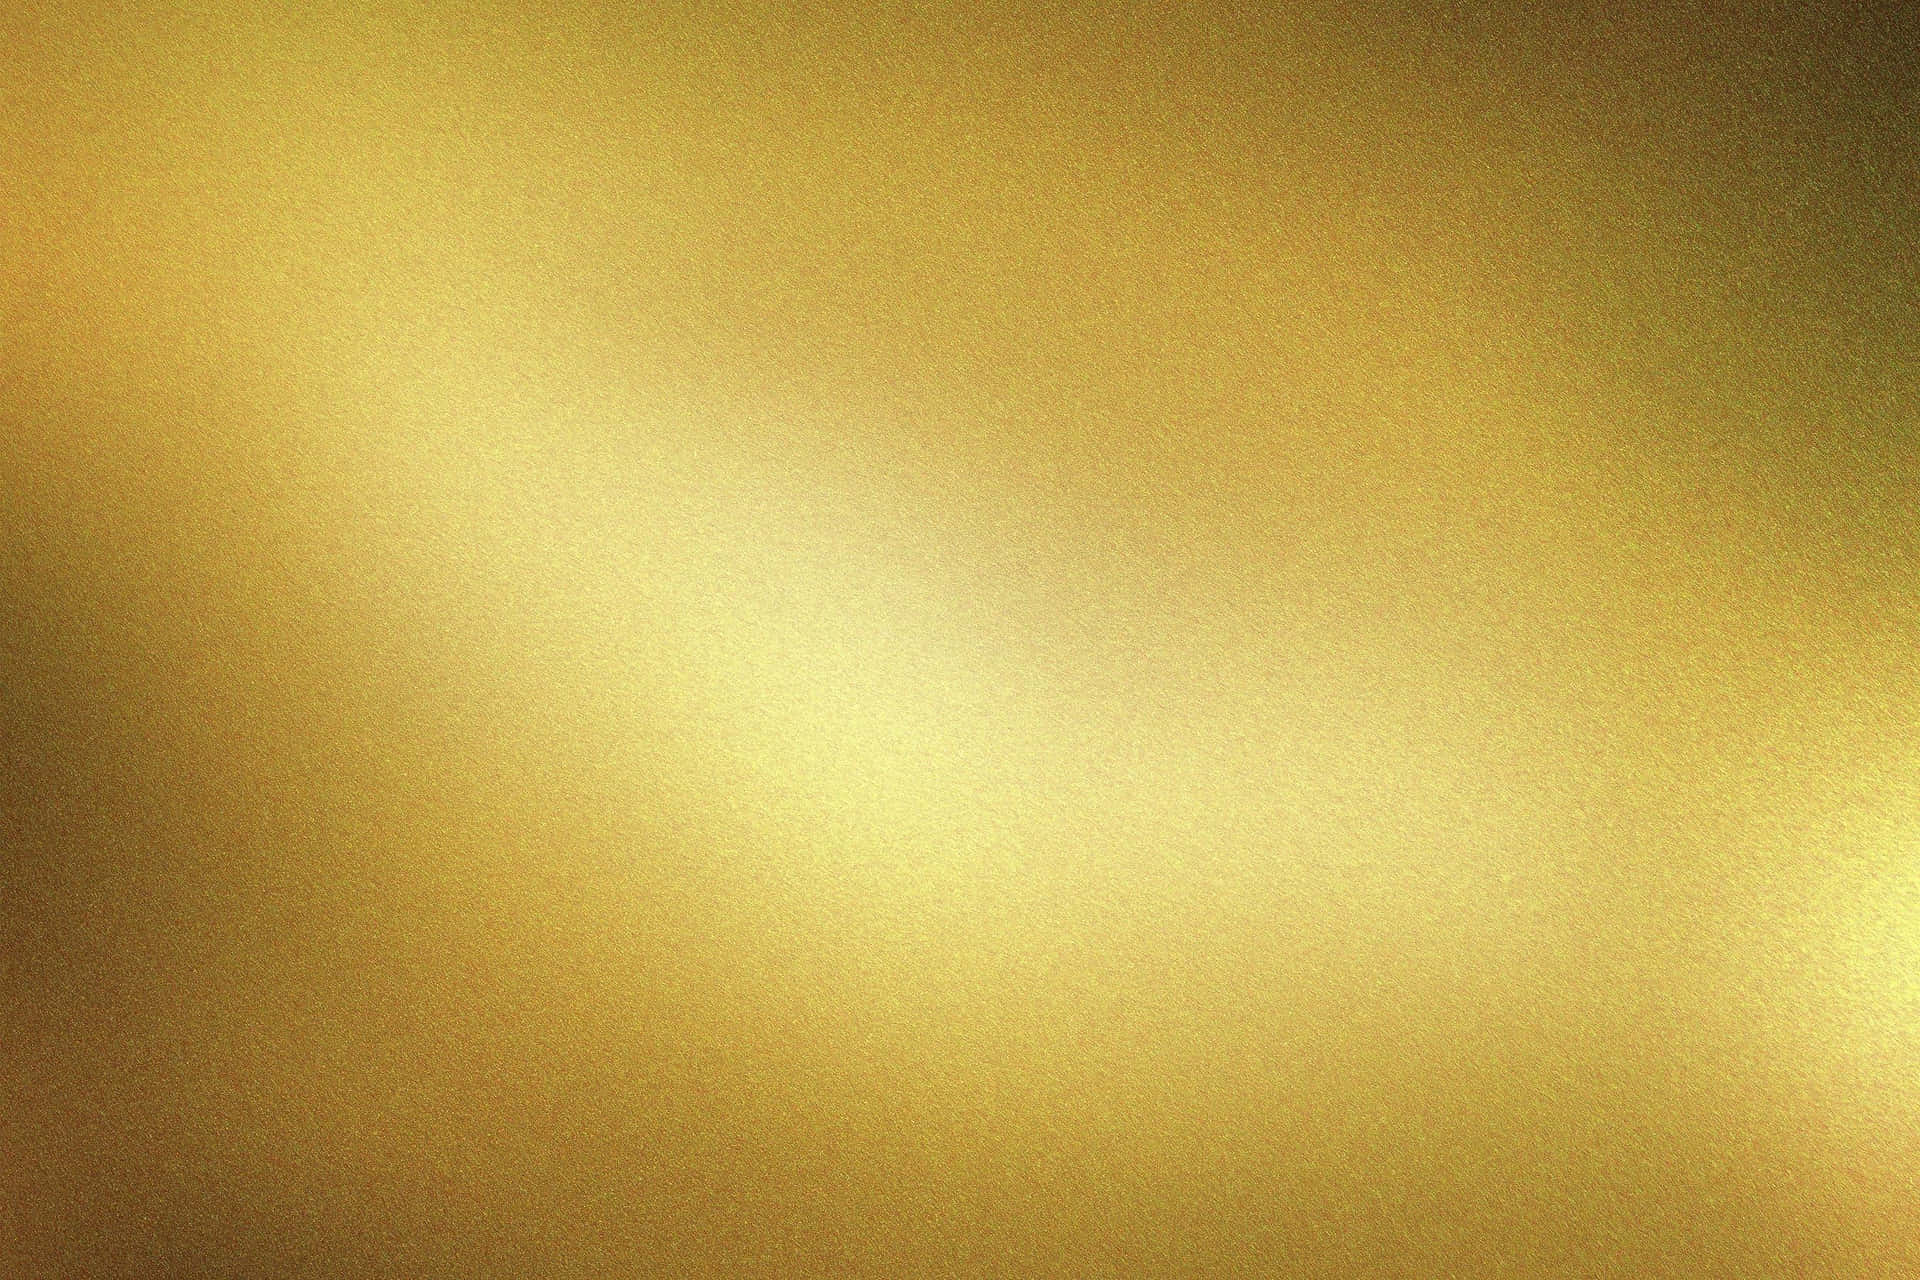 200+] Gold Texture Background s 